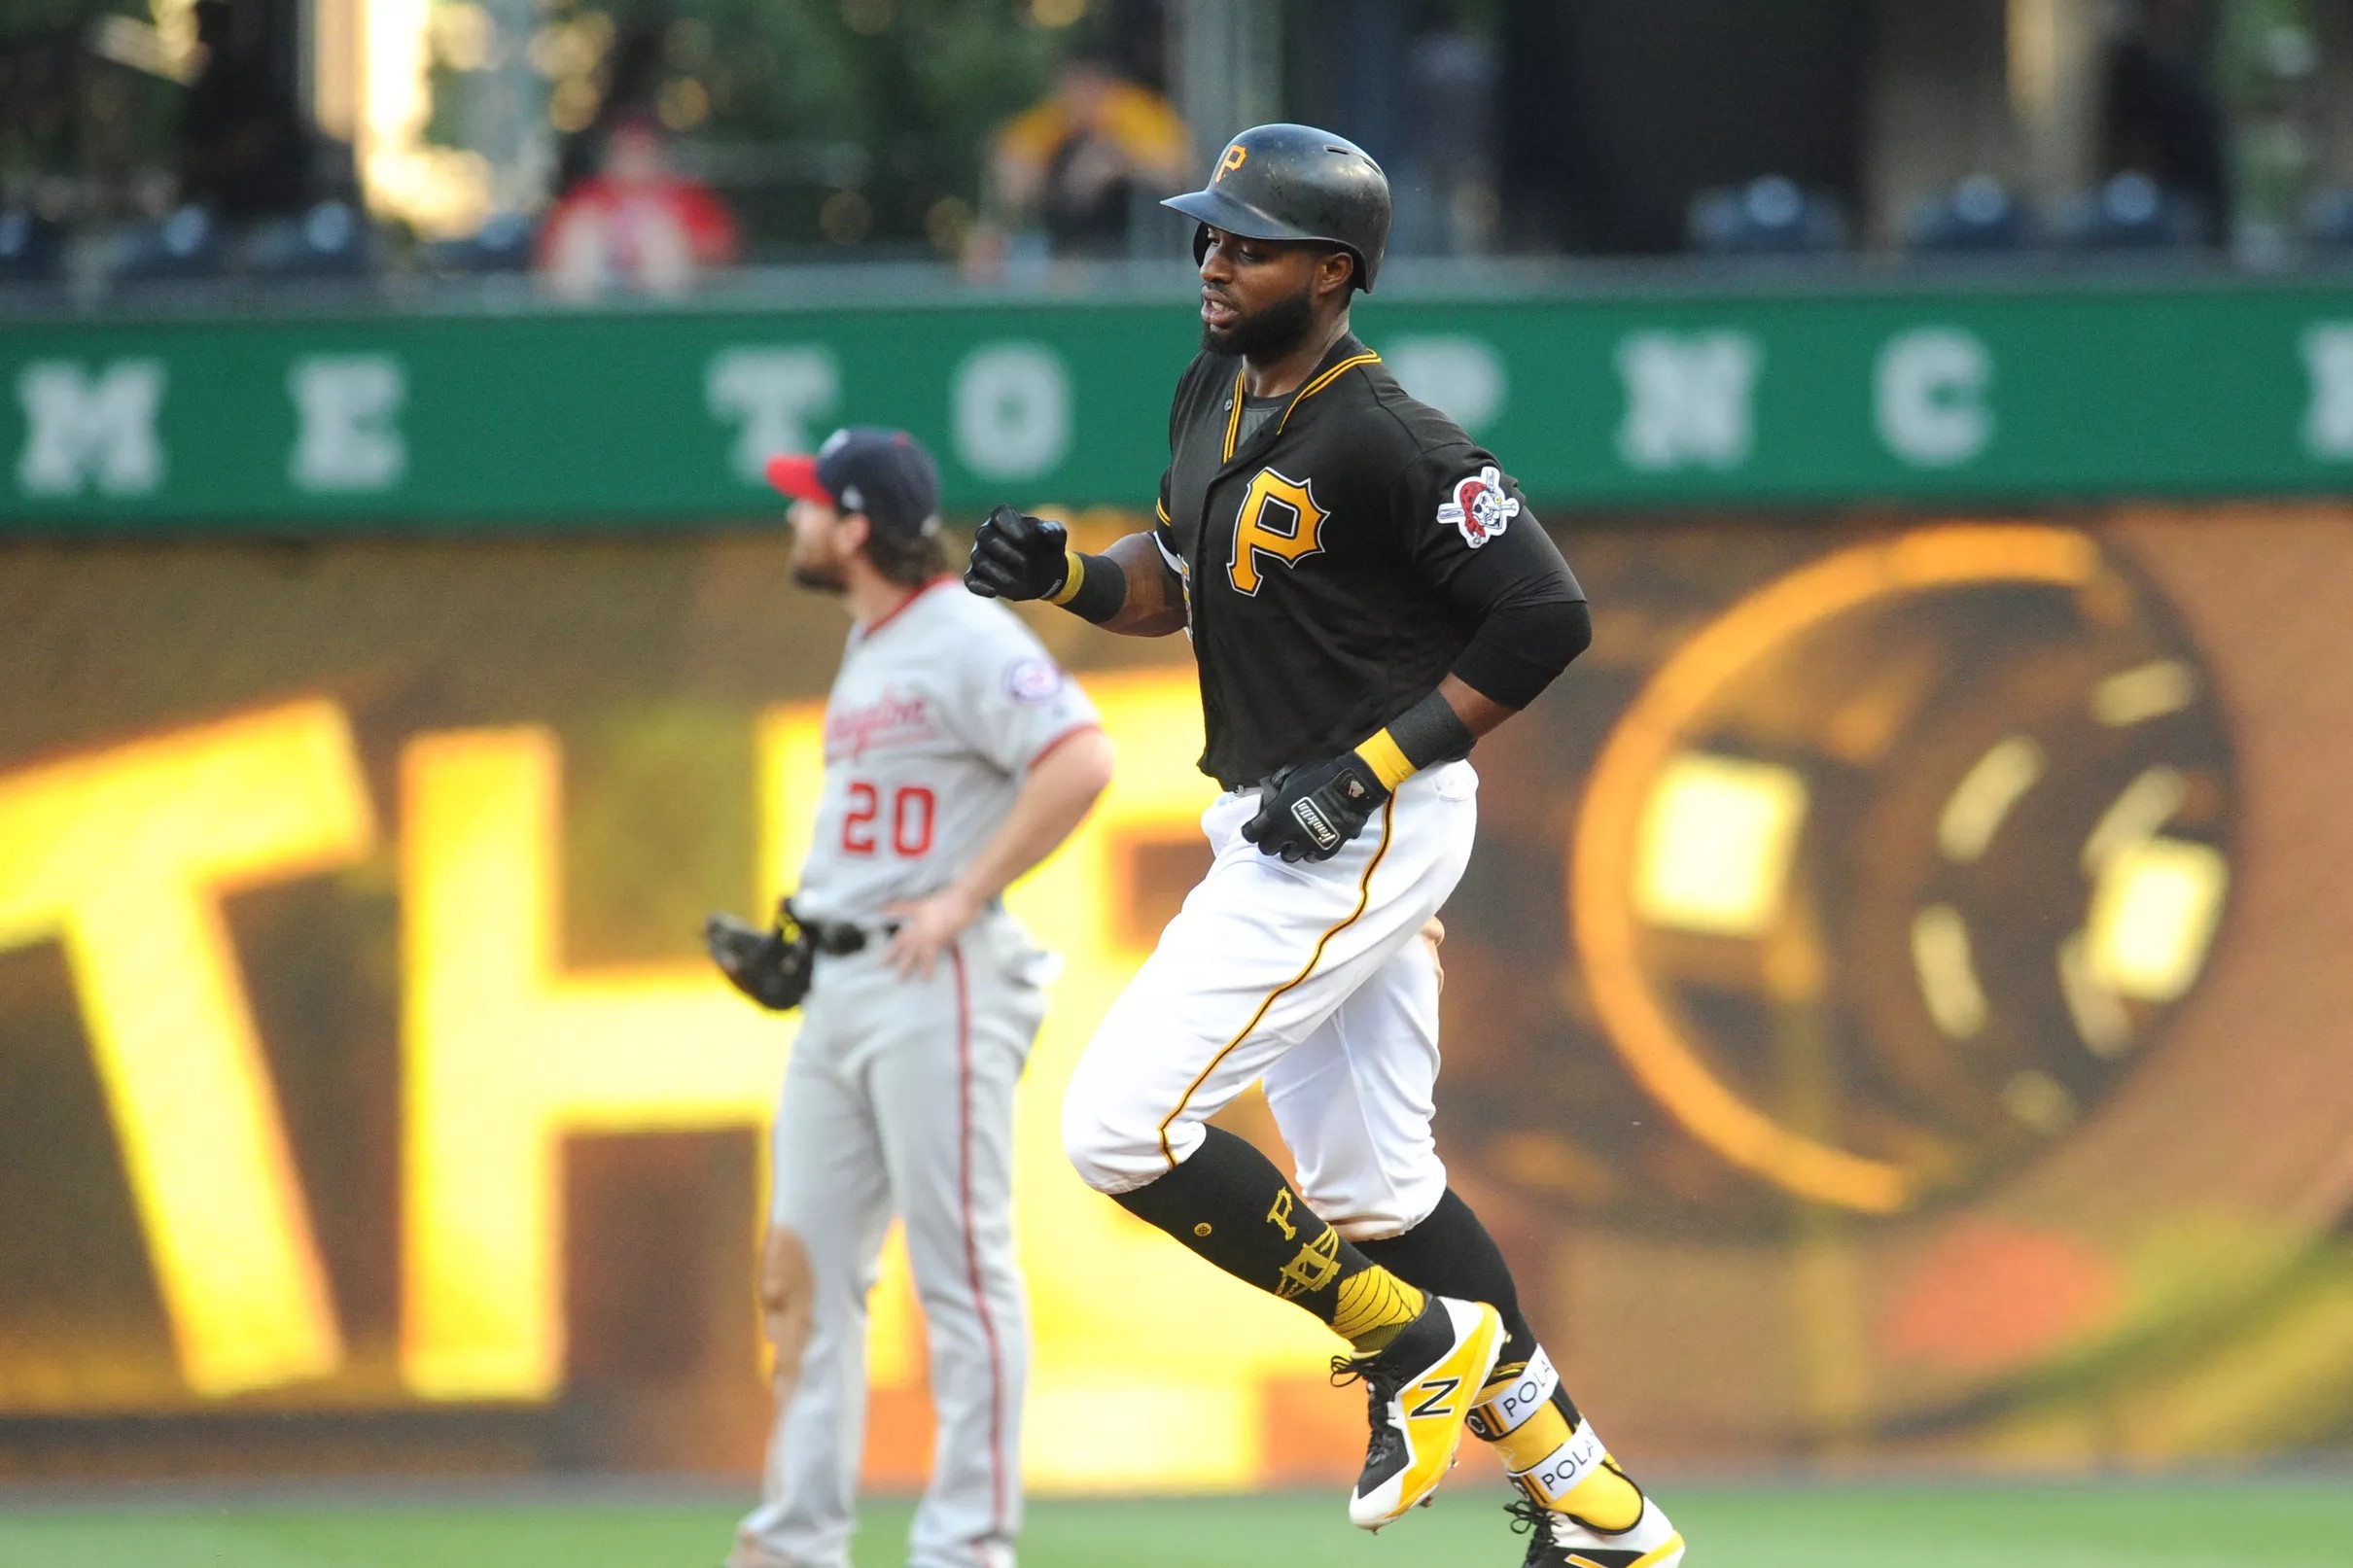 Pirates score early and often to down Nats 63